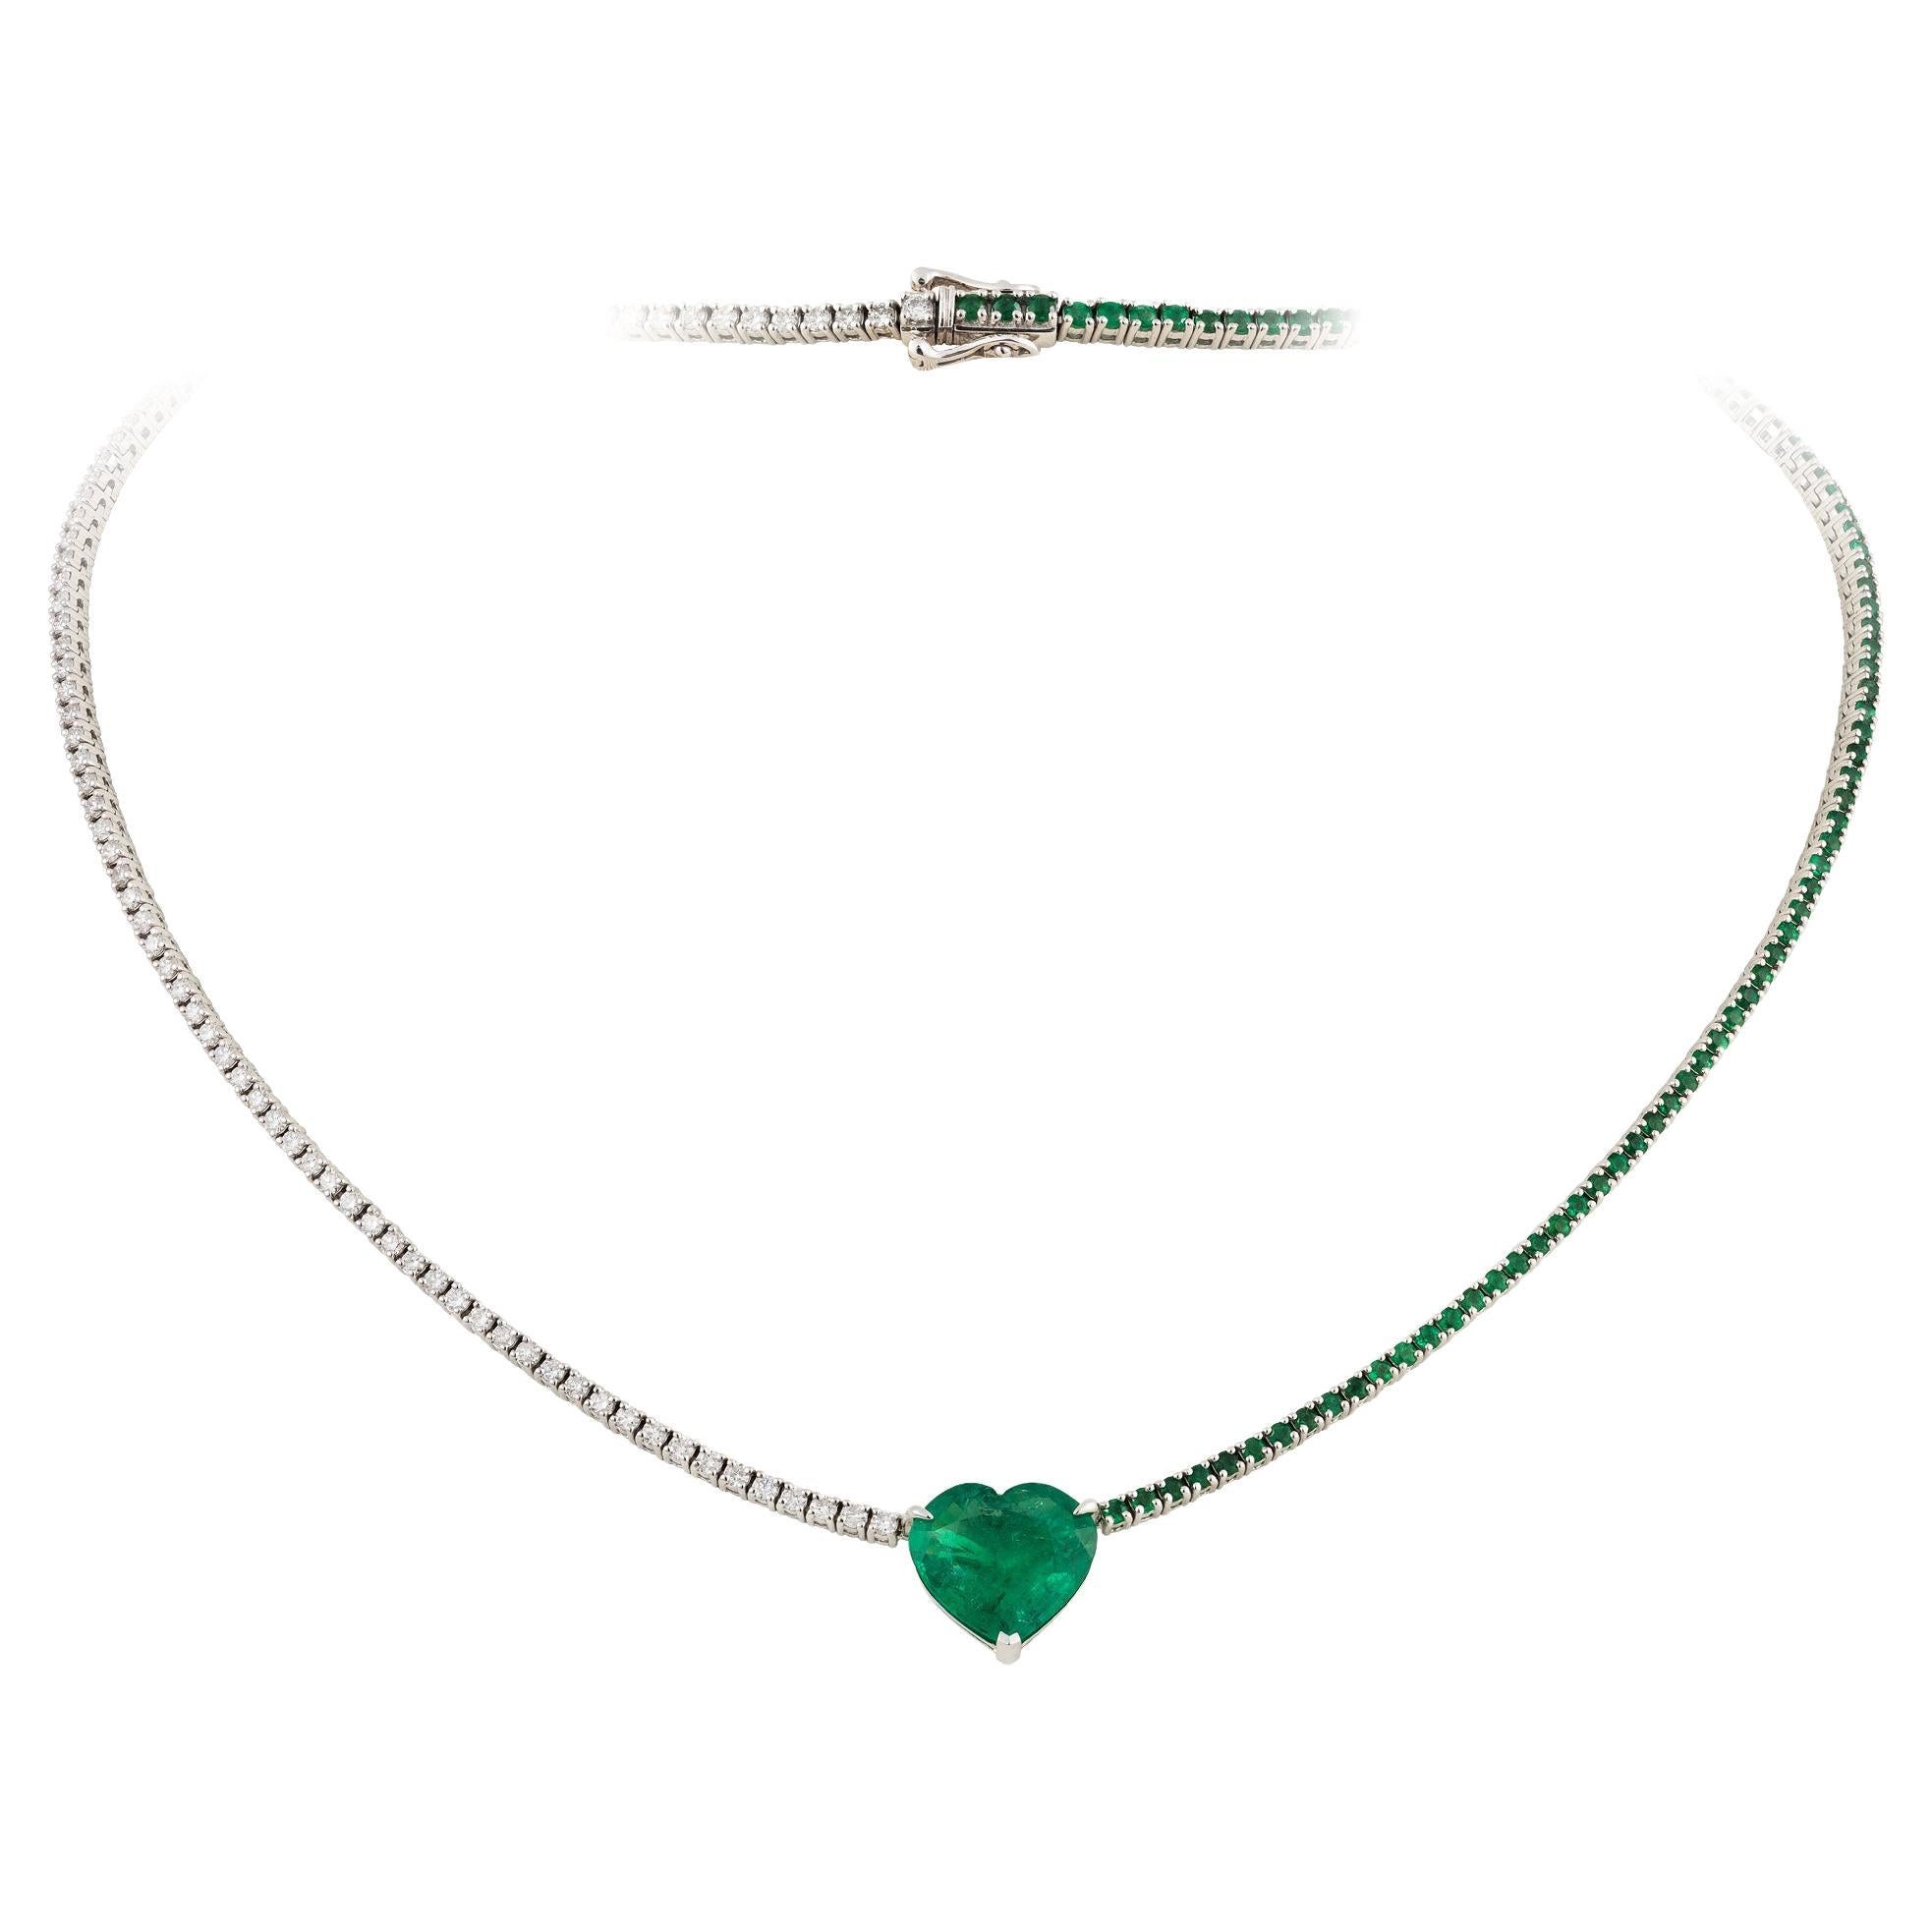 NWT $33, 000 18KT Gold Glittering Fancy Large Emerald Heart Diamond Necklace For Sale